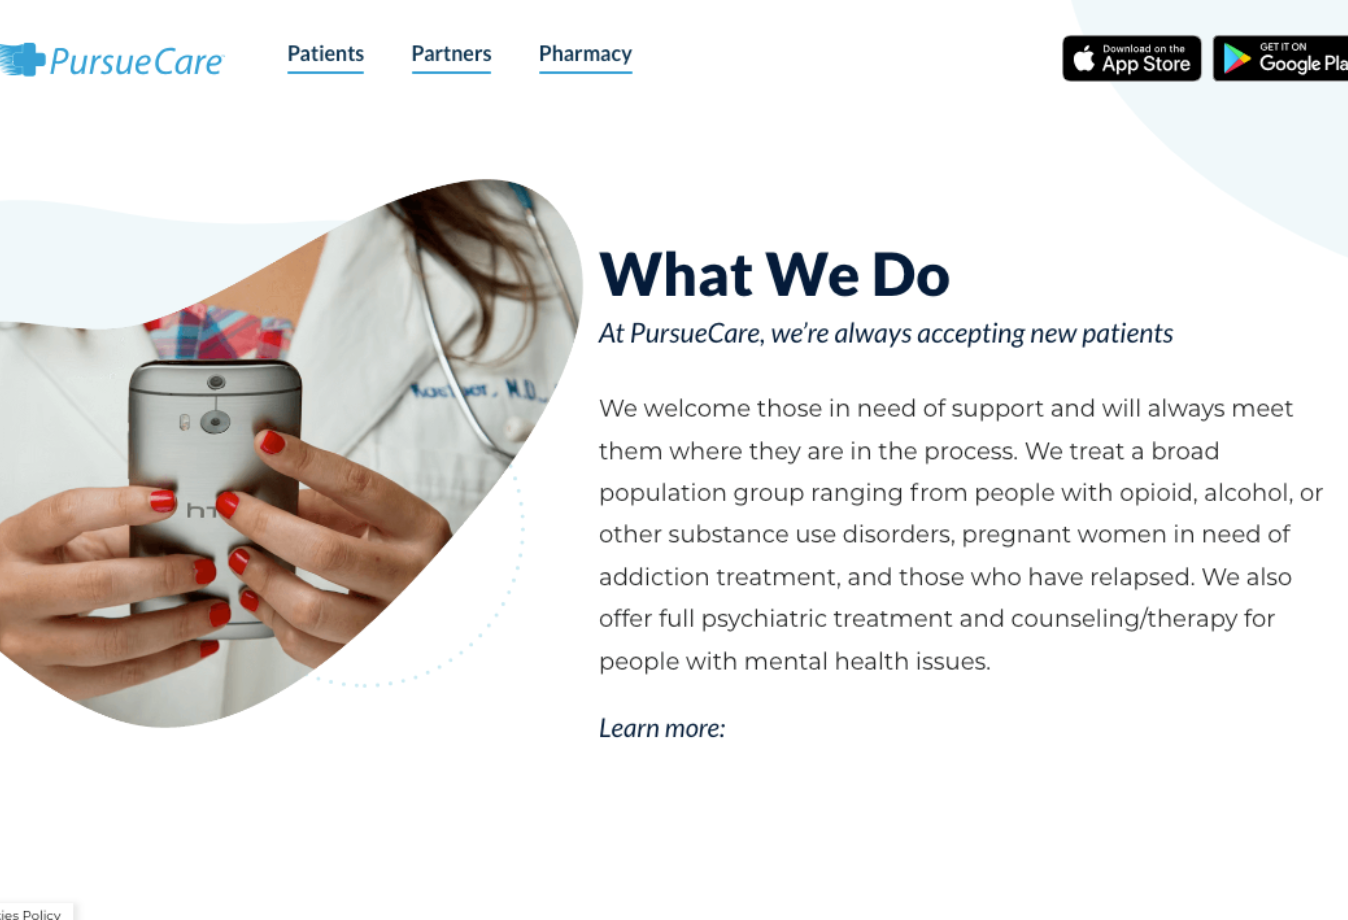 PursueCare page on learning more about services